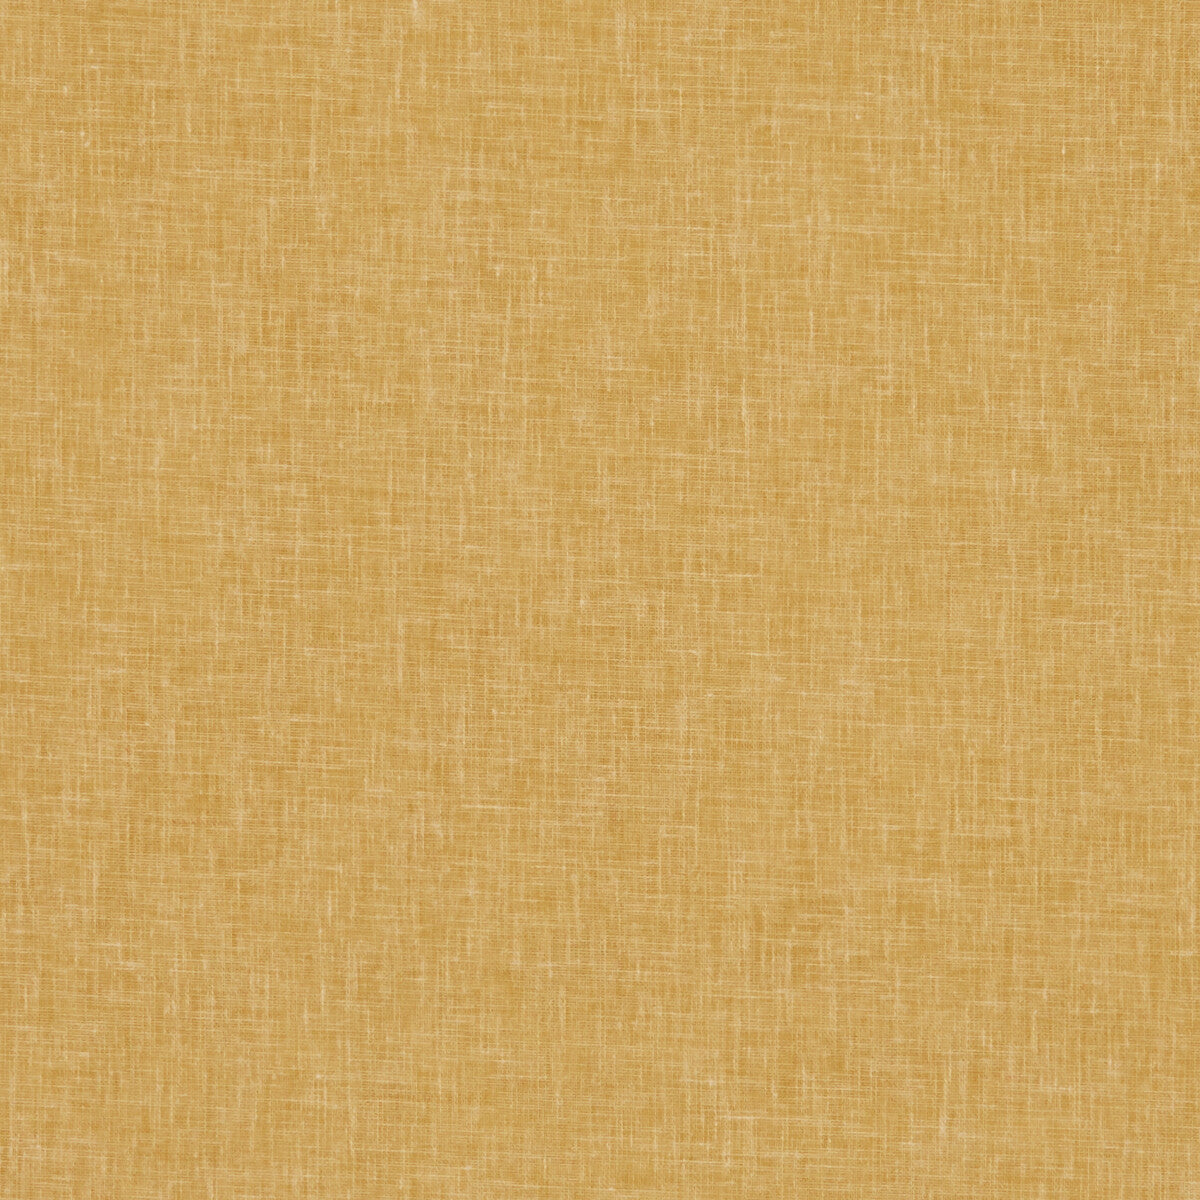 Midori fabric in honey color - pattern F1068/21.CAC.0 - by Clarke And Clarke in the Clarke &amp; Clarke Midori collection